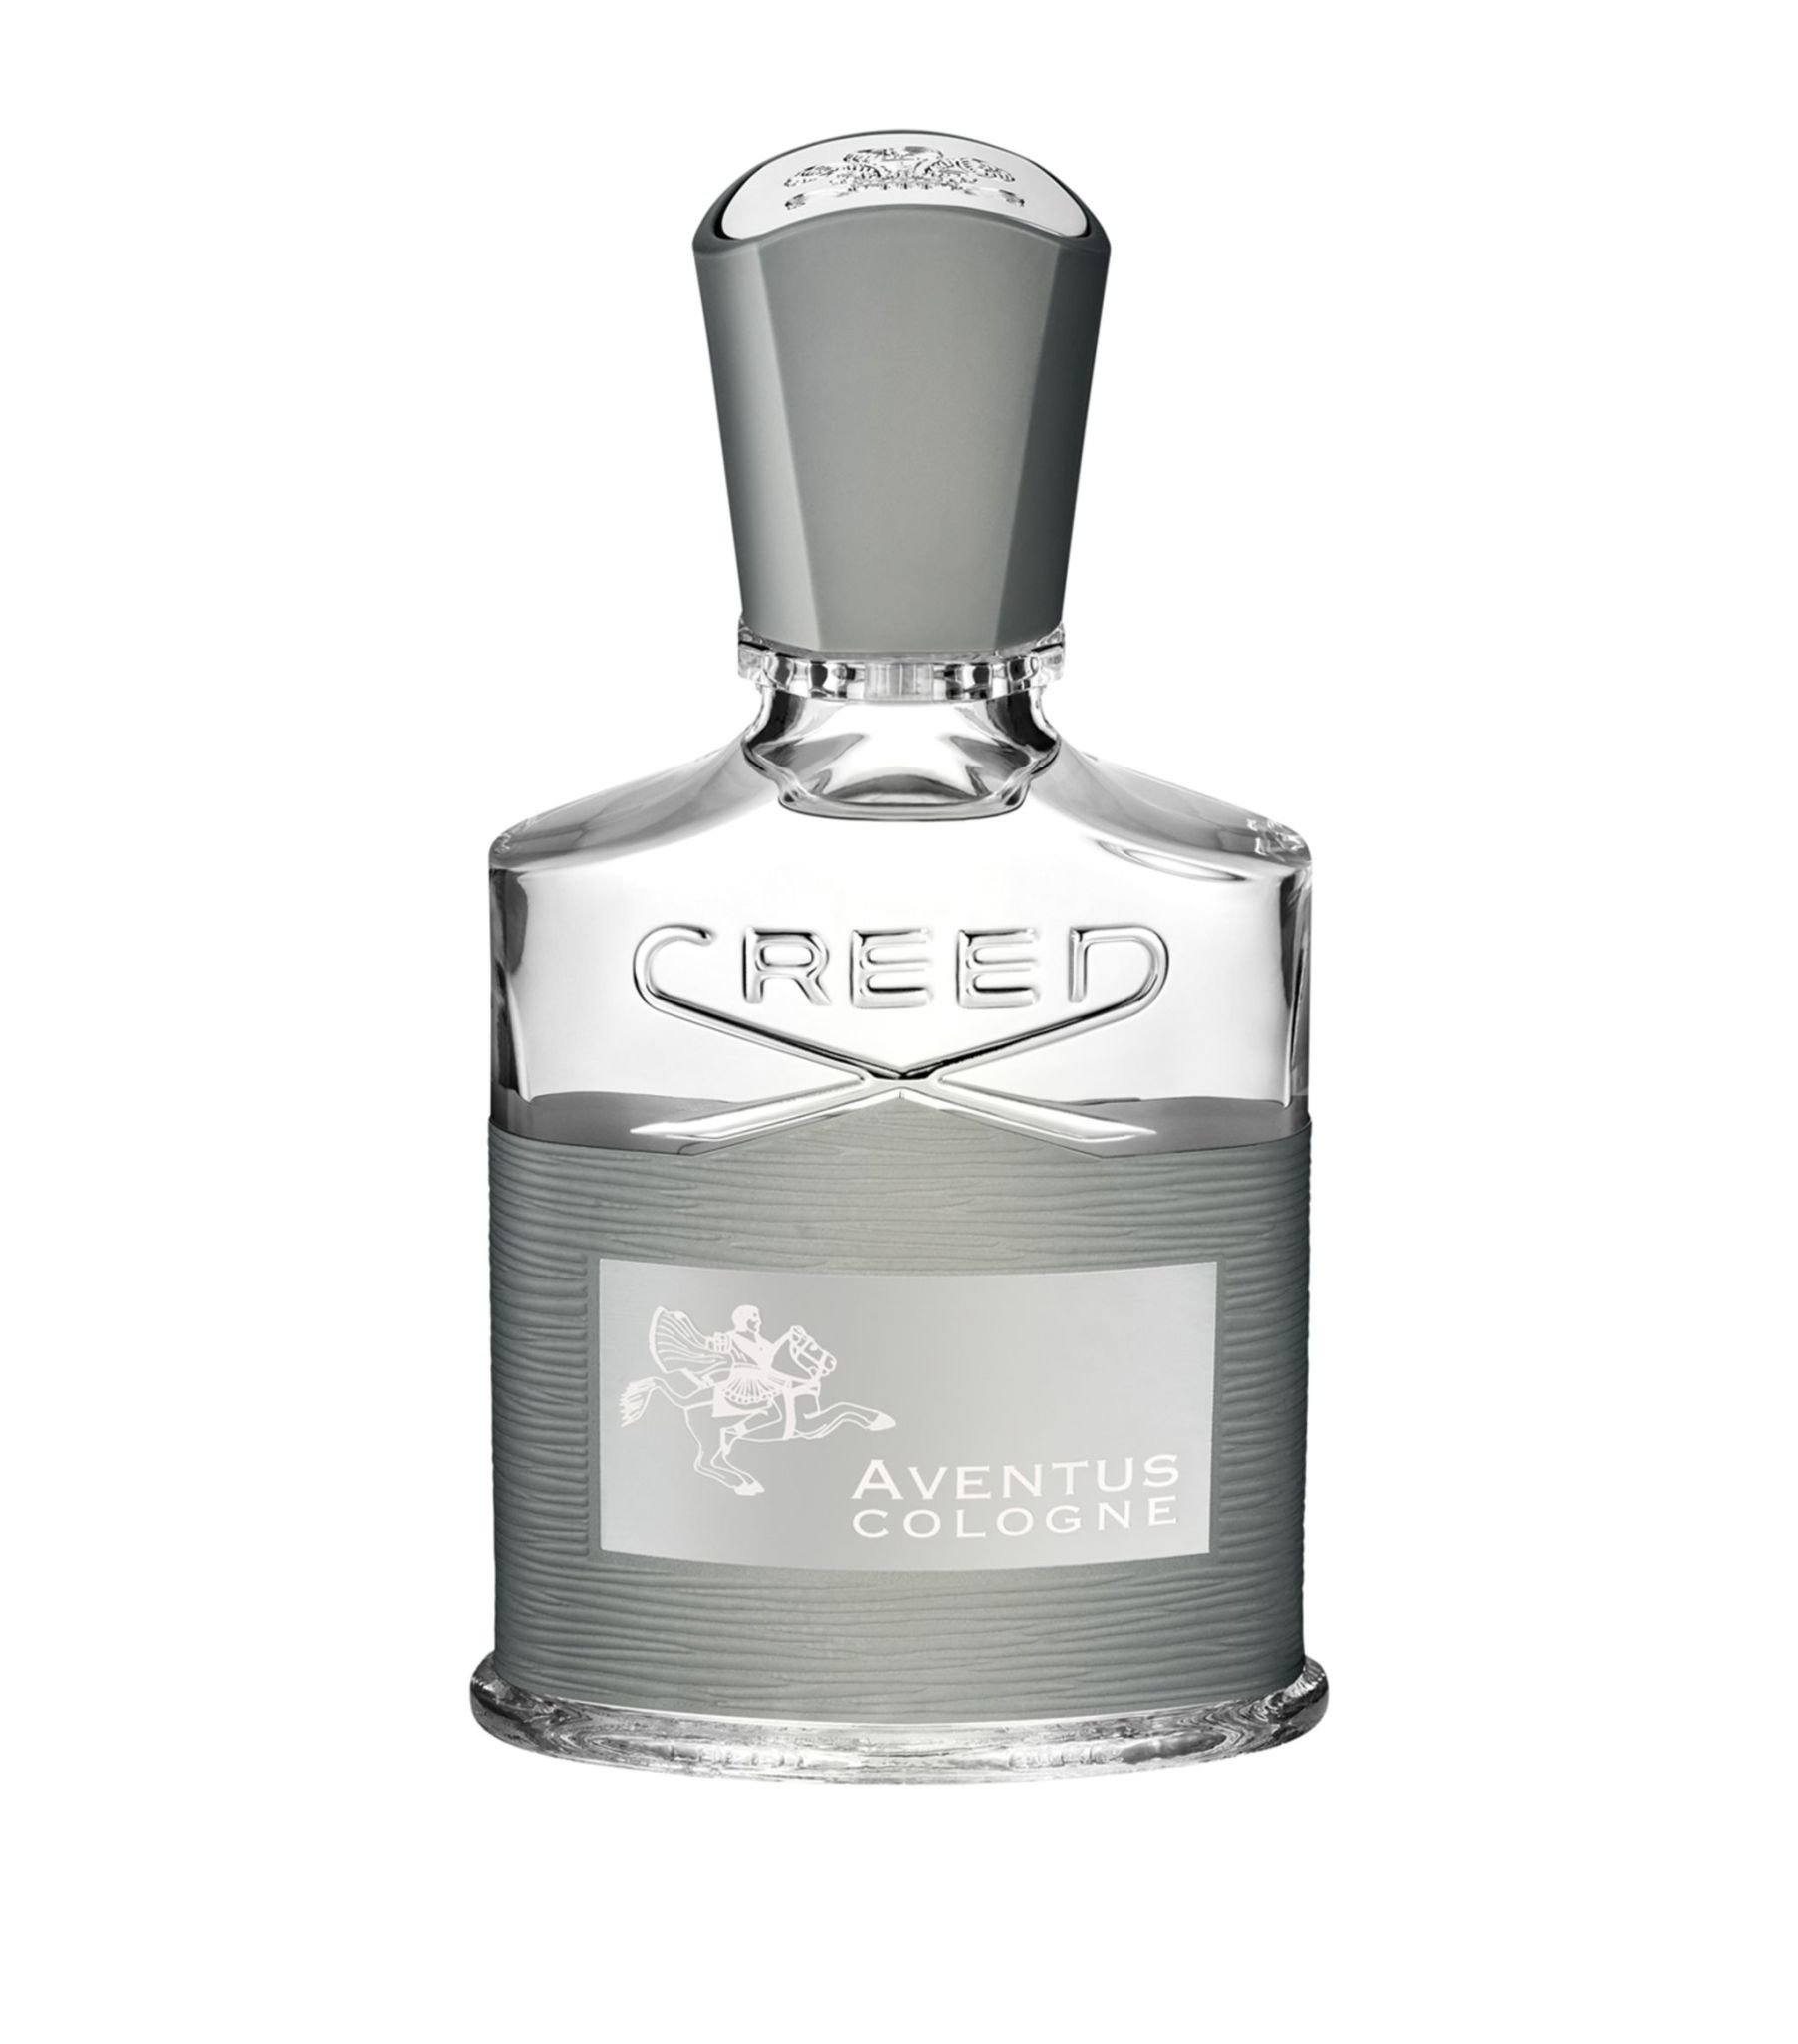  Creed Aventus Cologne, Men's Luxury Cologne, Dry Woods, Fresh &  Citrus Fruity Fragrance, 50ML : Video Games